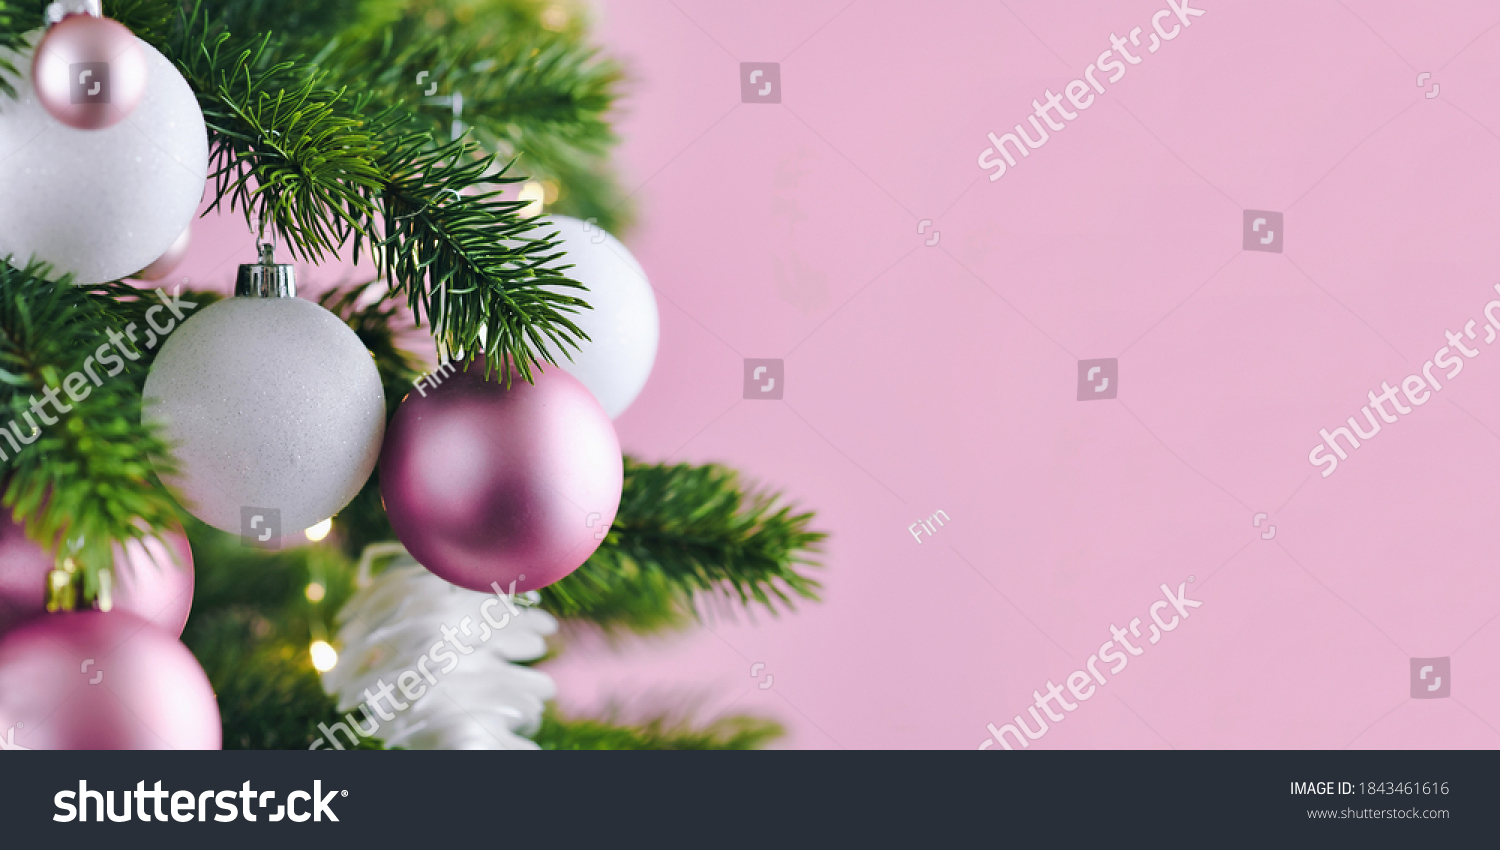 Banner with Christmas tree decorated with white and pink seasonal tree ornament baubles on pink background with empty copy space #1843461616